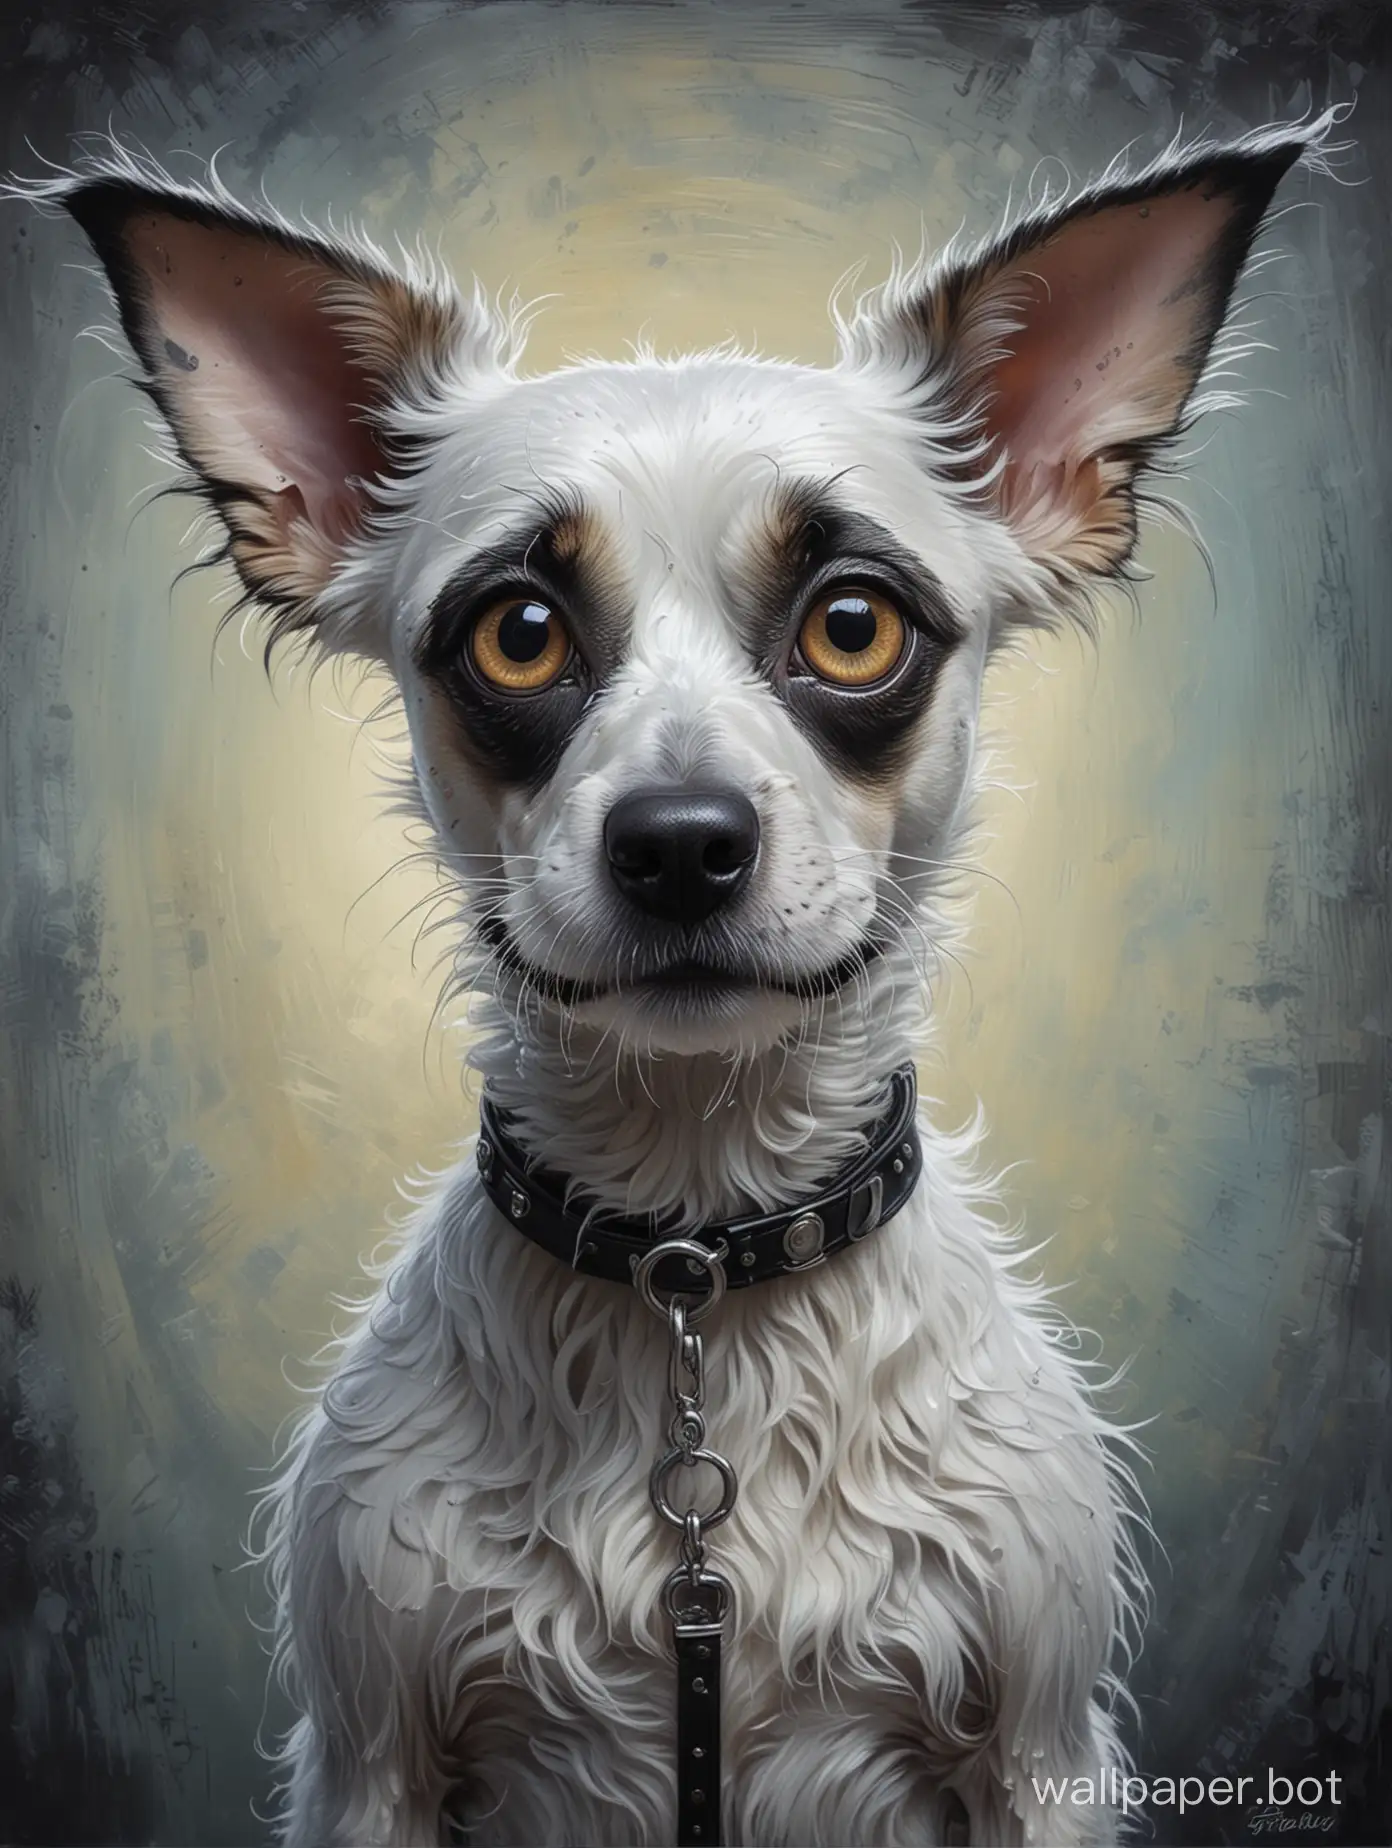 Eccentric-Mystical-Dog-Portrait-Surreal-Oil-Painting-Inspired-by-Tim-Burton